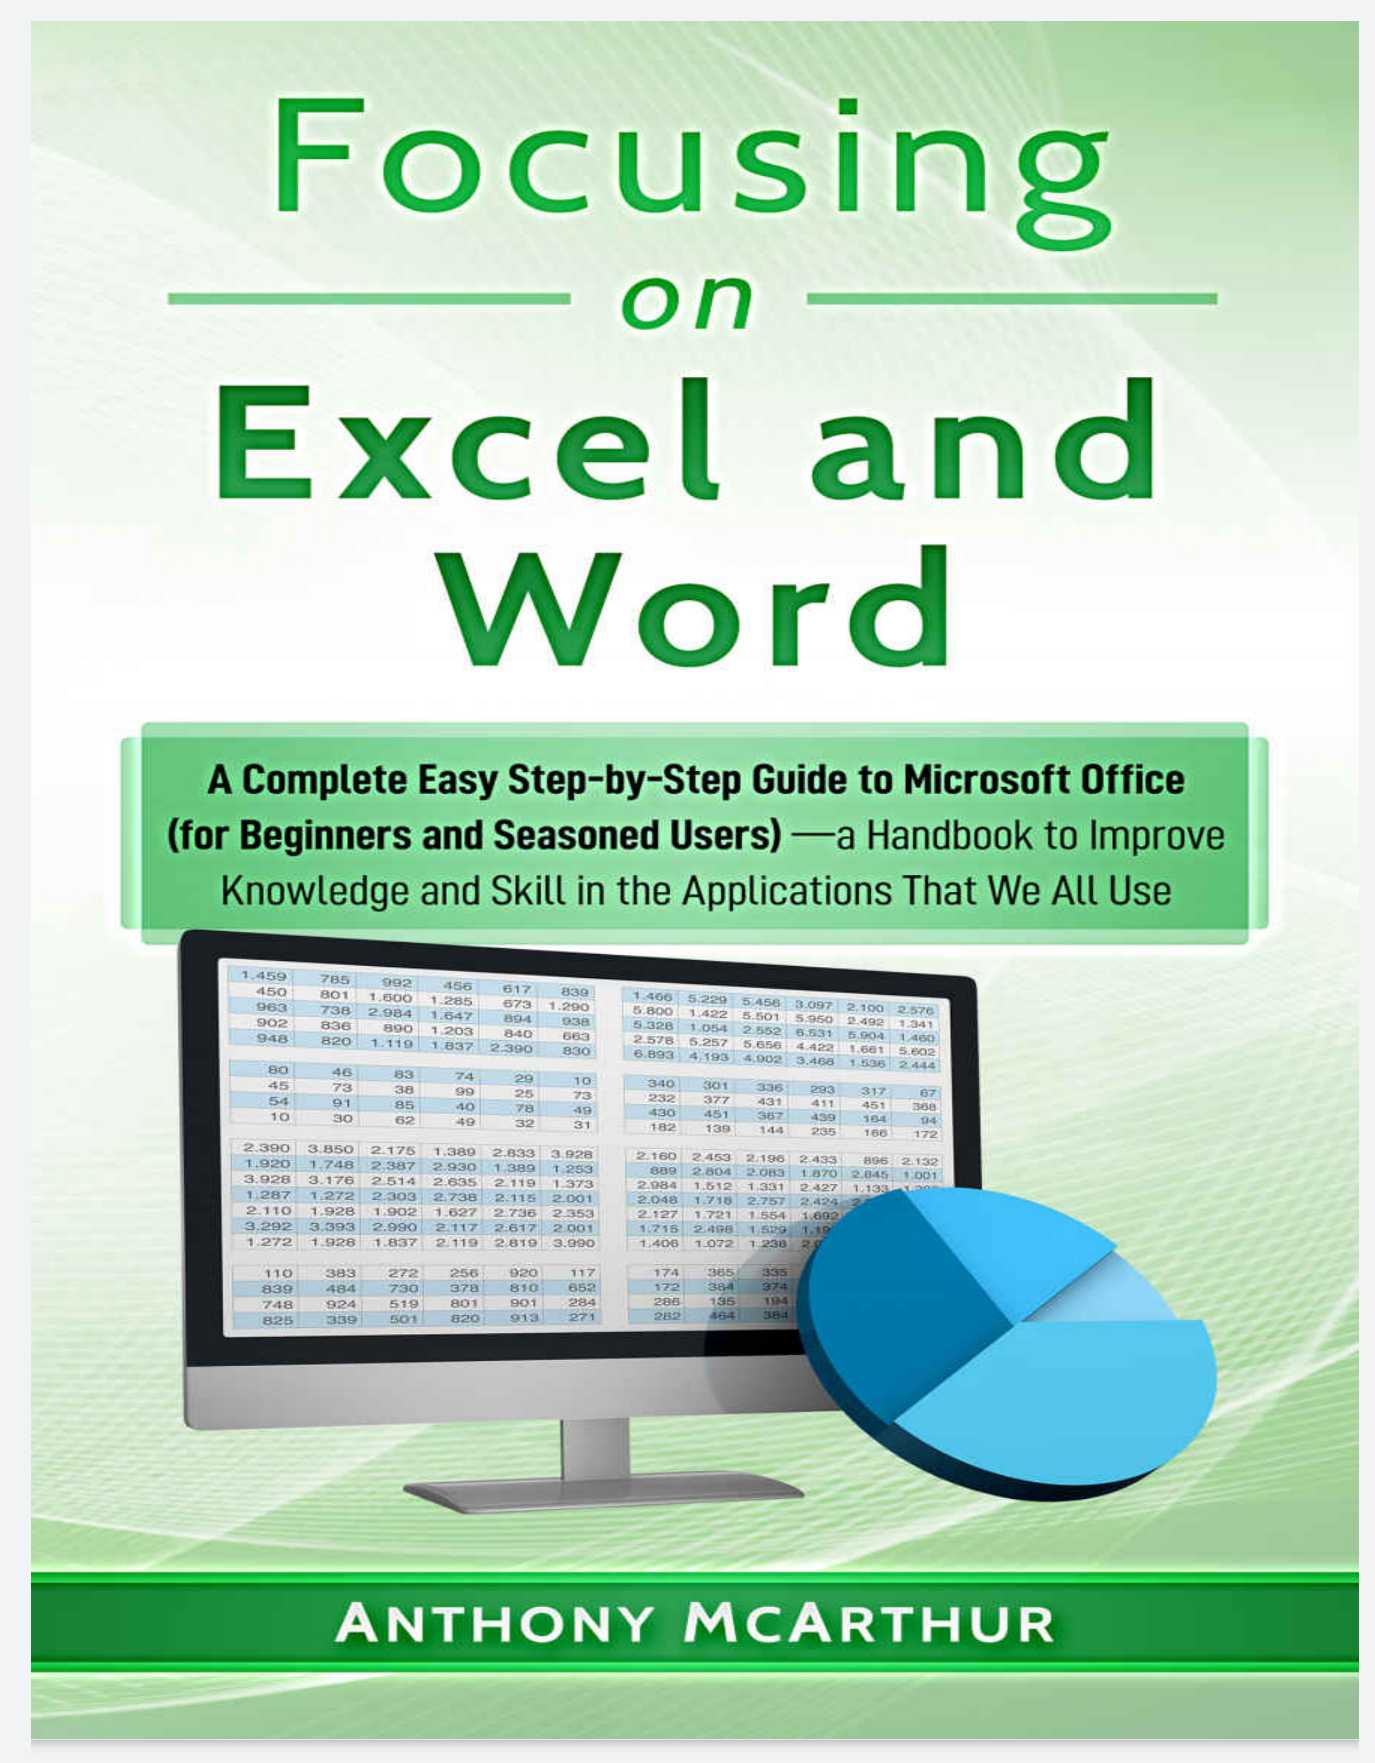 Focusing on Excel and Word: A Complete Easy Step-by-Step Guide to Microsoft Office (for Beginners and Seasoned Users)